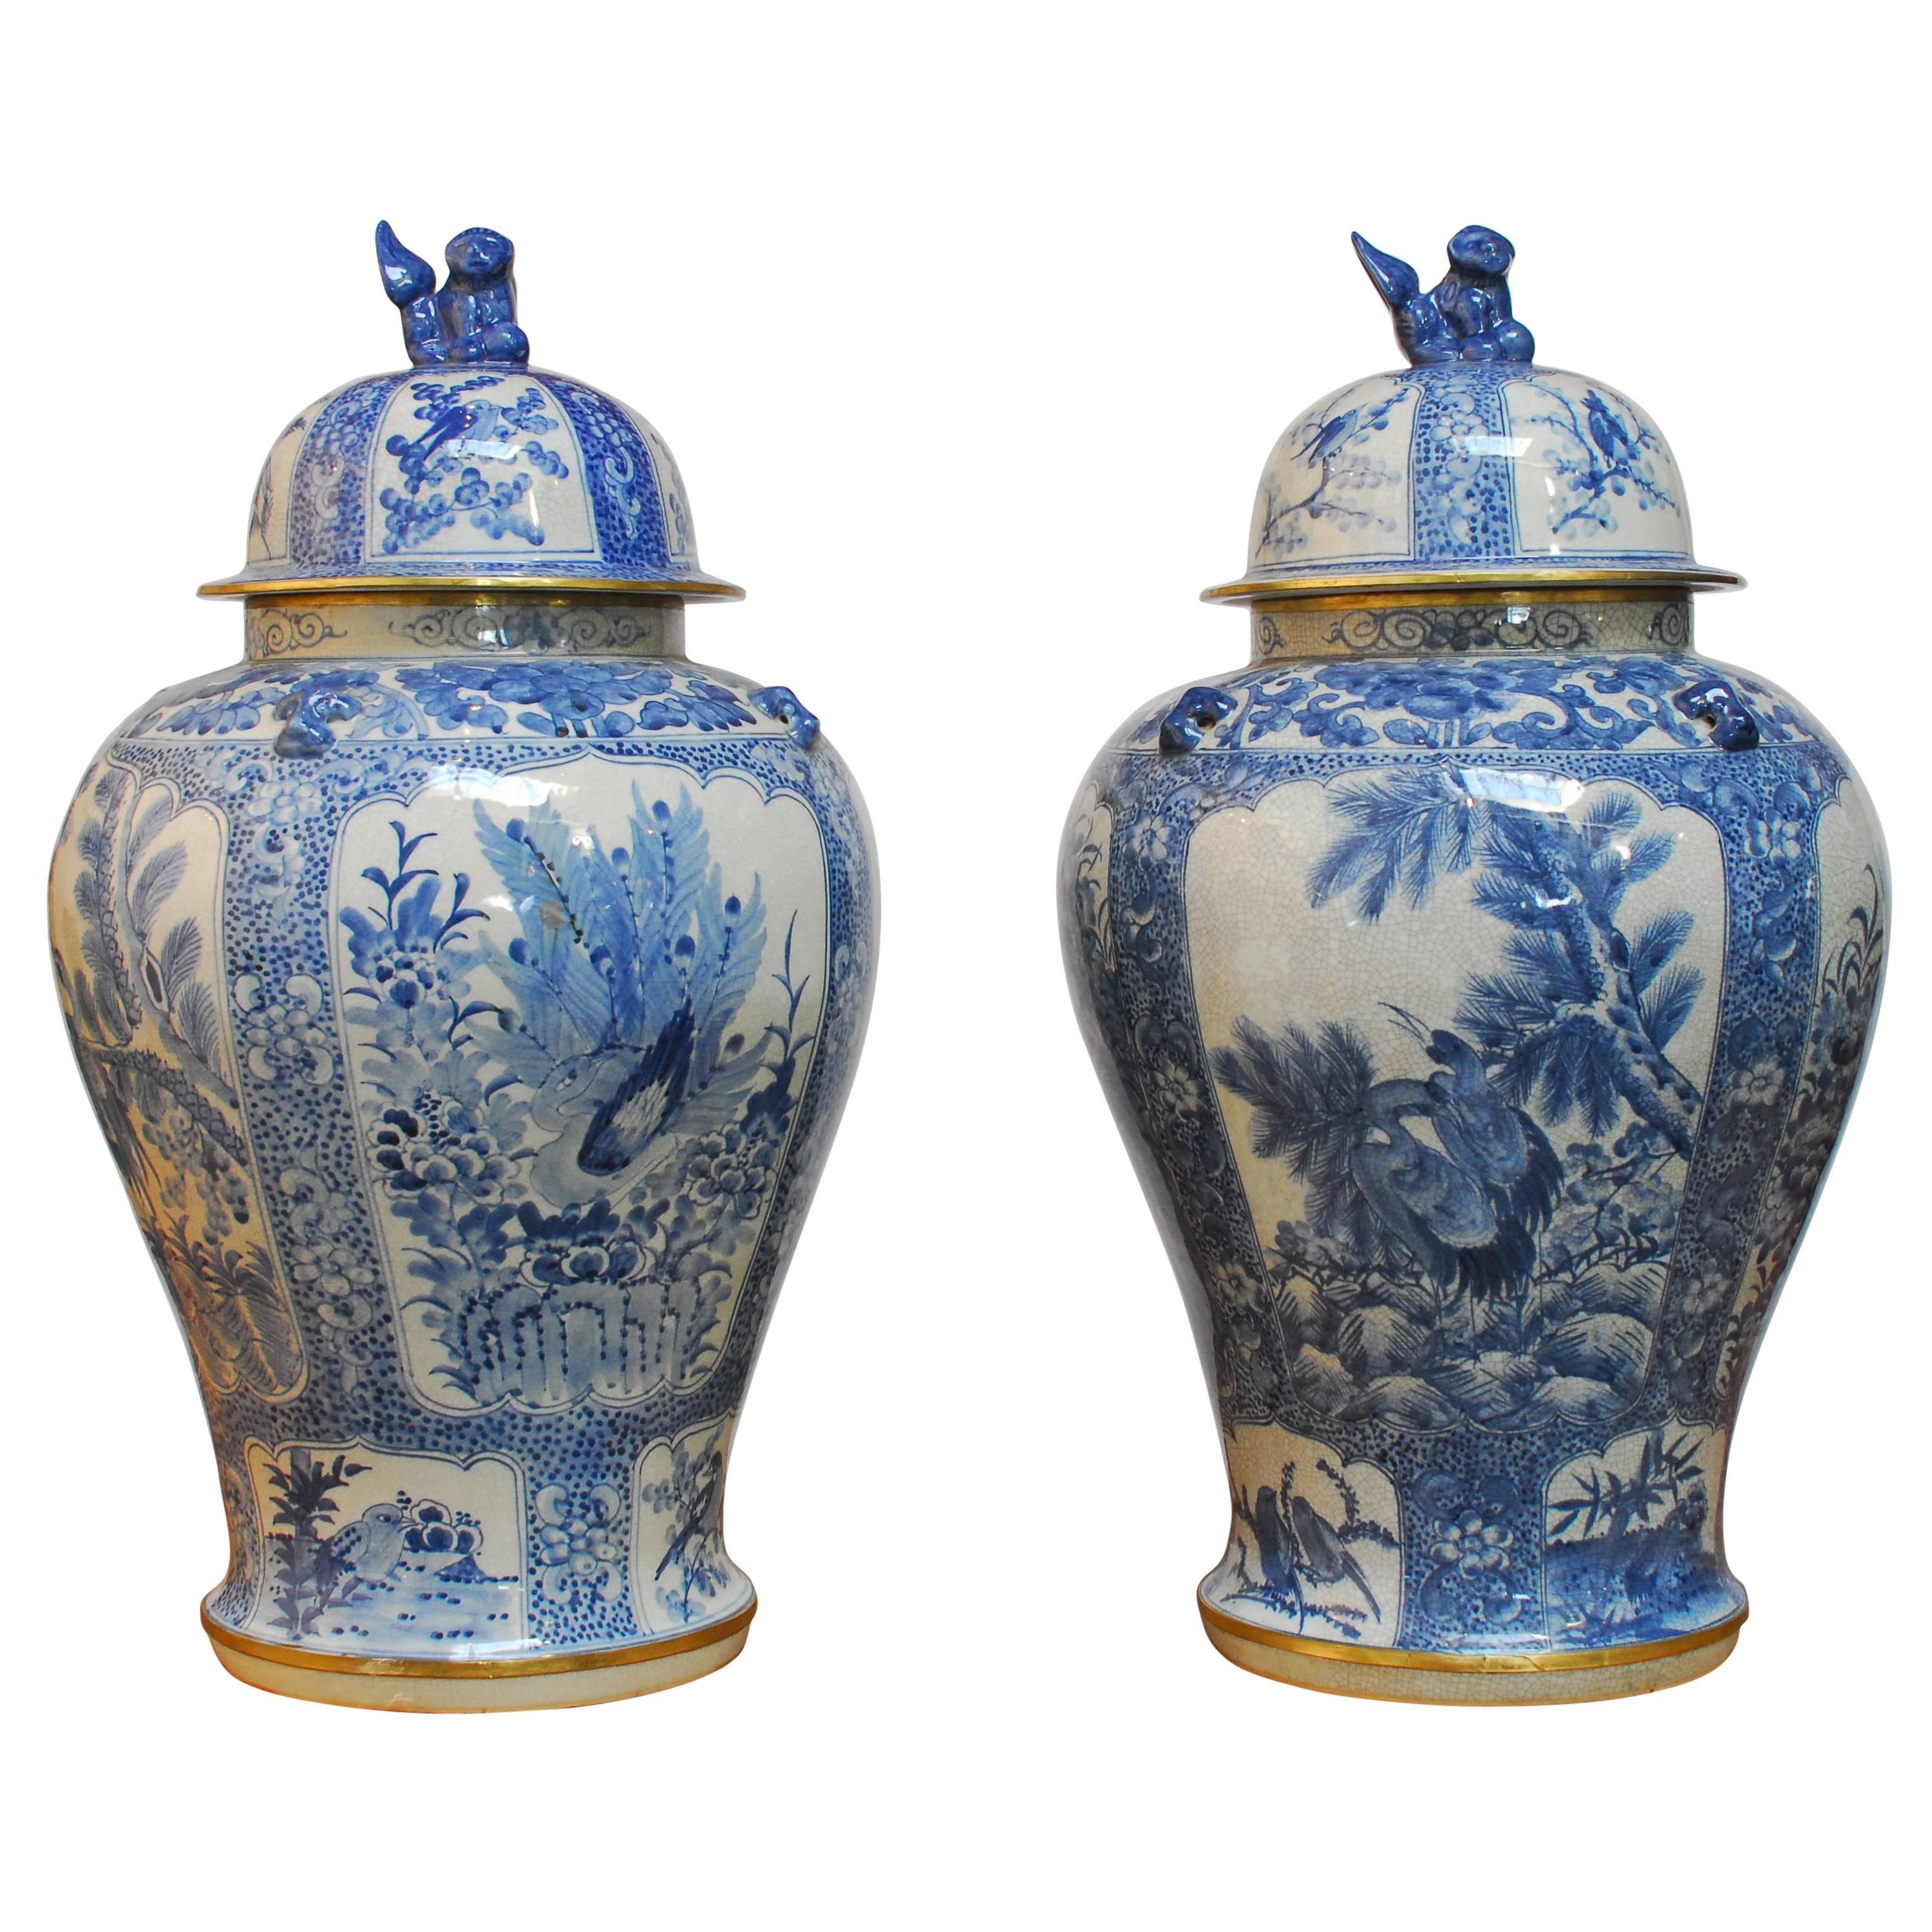 Pair of Monumental Blue and White Temple Jars by Maitland-Smith